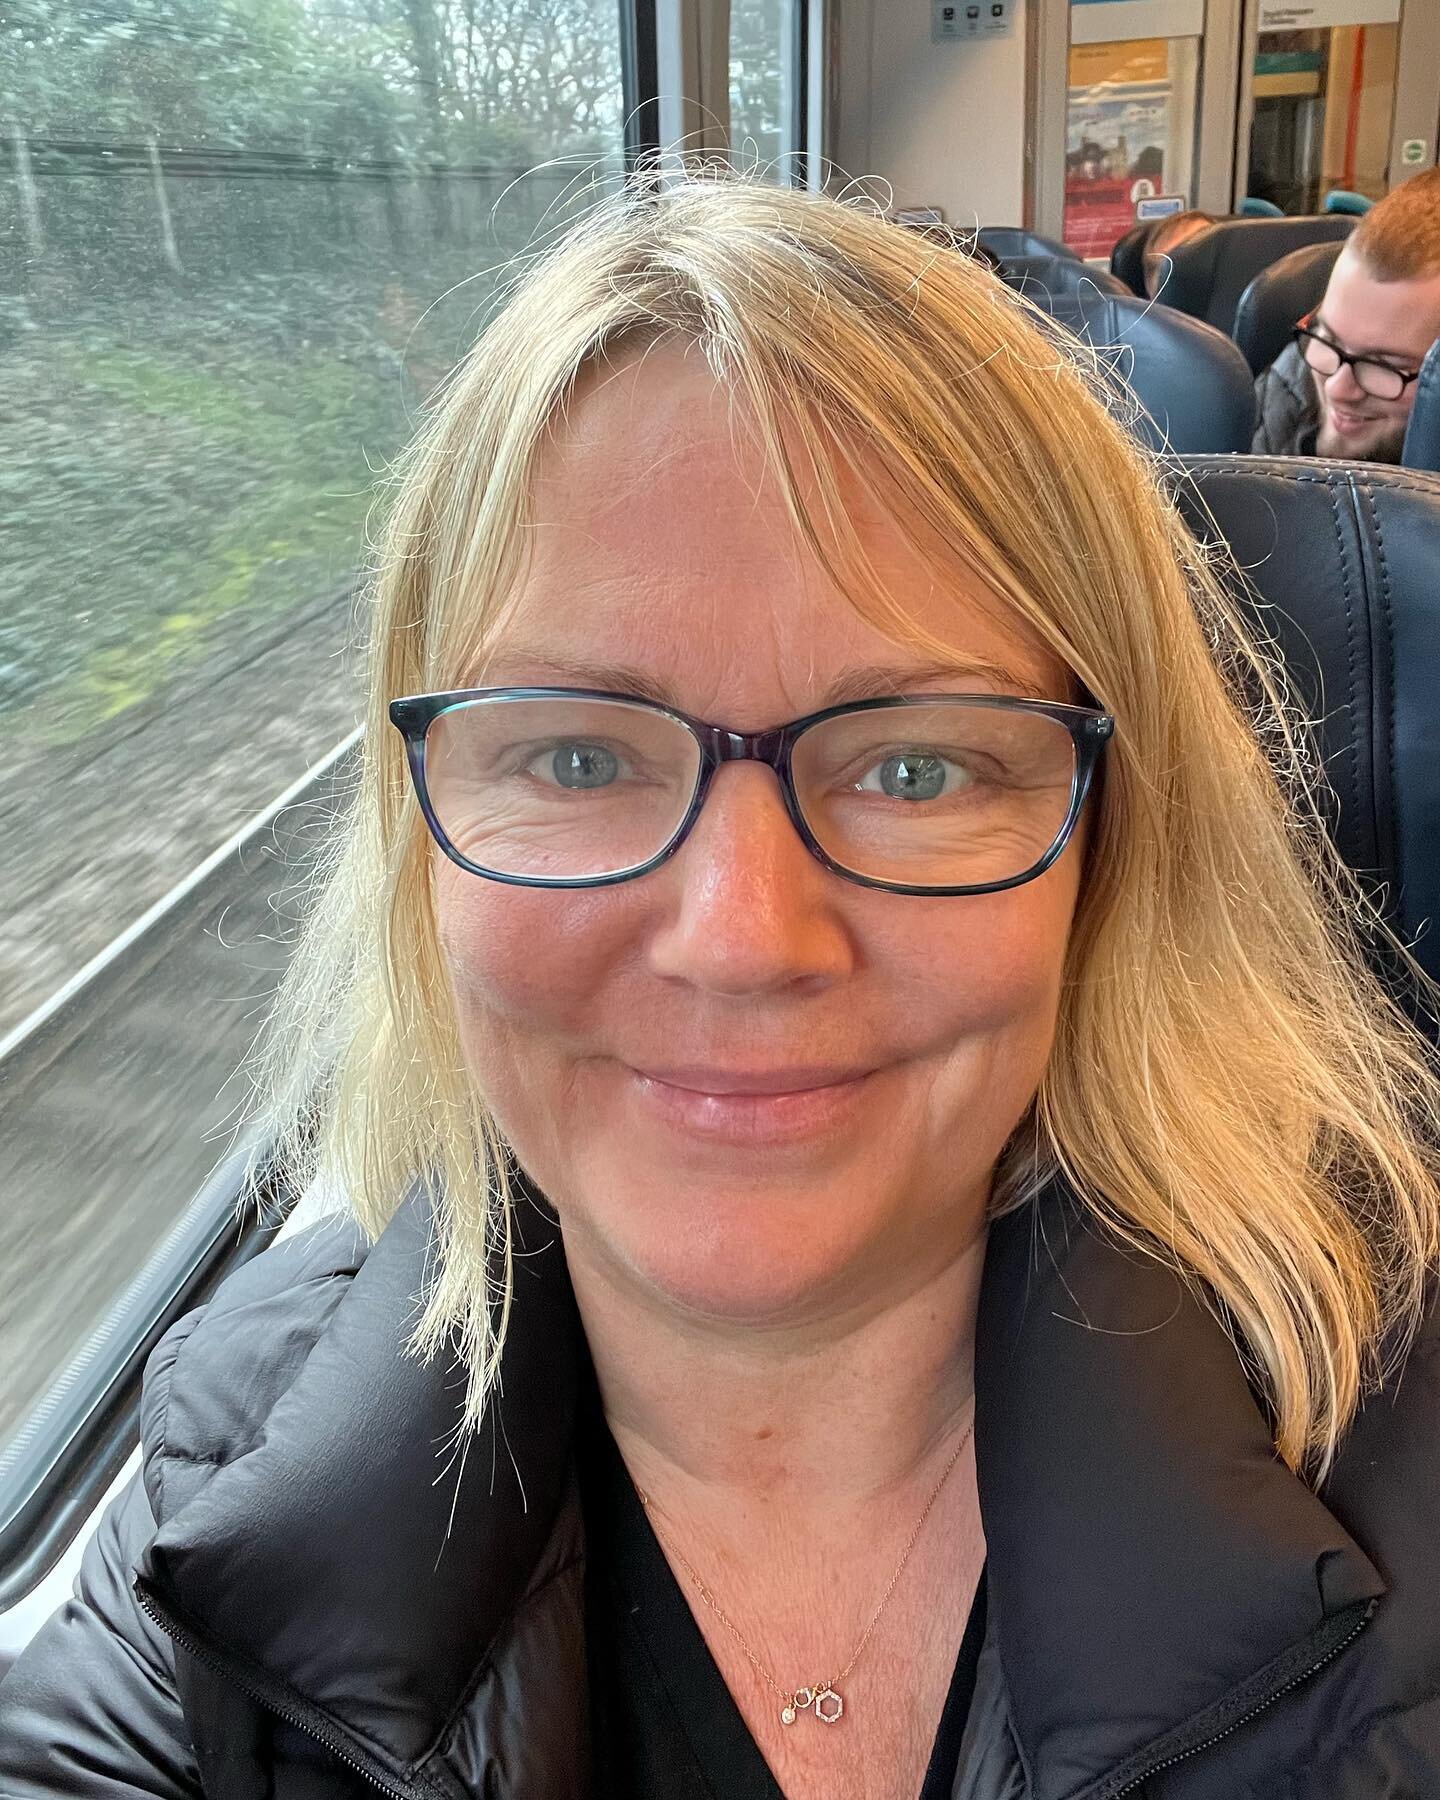 I am on the way to London for a 5 day course! I can&rsquo;t wait. I love living in Dorset and it&rsquo;s chilled way of life but I am excited about catching up with friends and adding new skills to use. 

Happy Sunday!